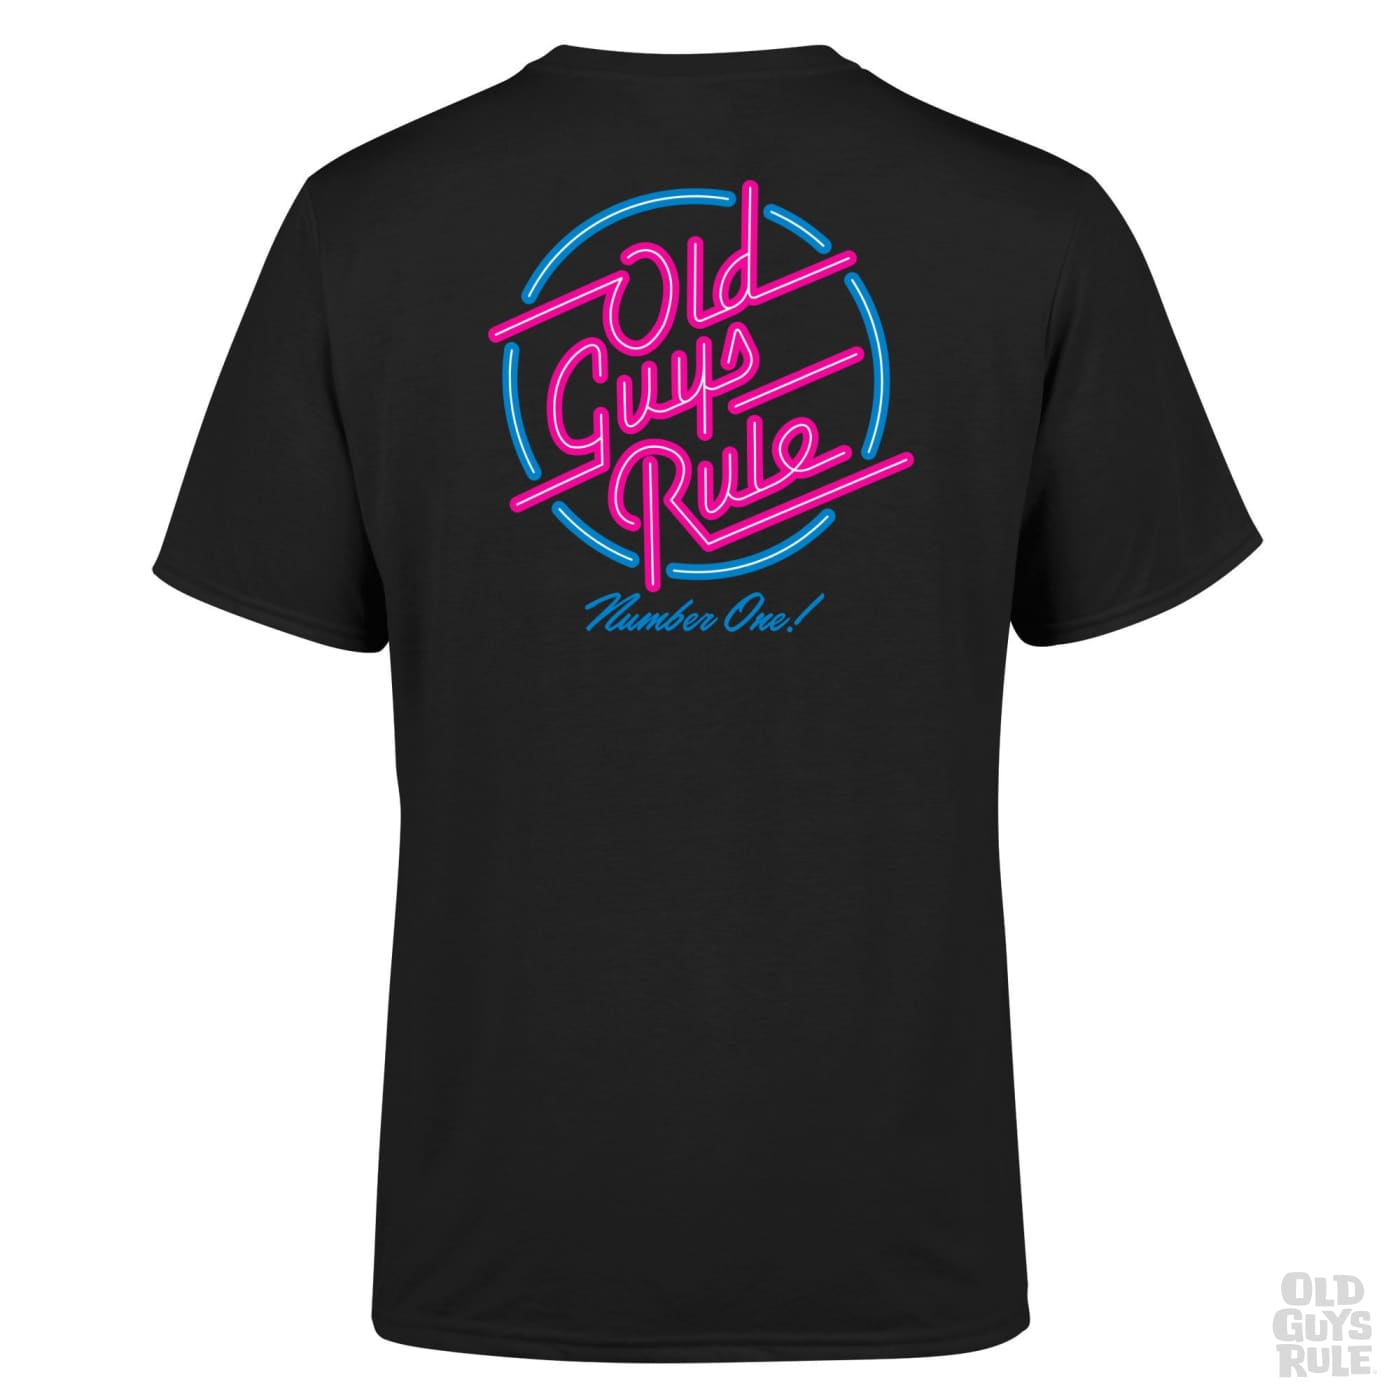 Old Guys Rule Top of the Pops T-Shirt - Black